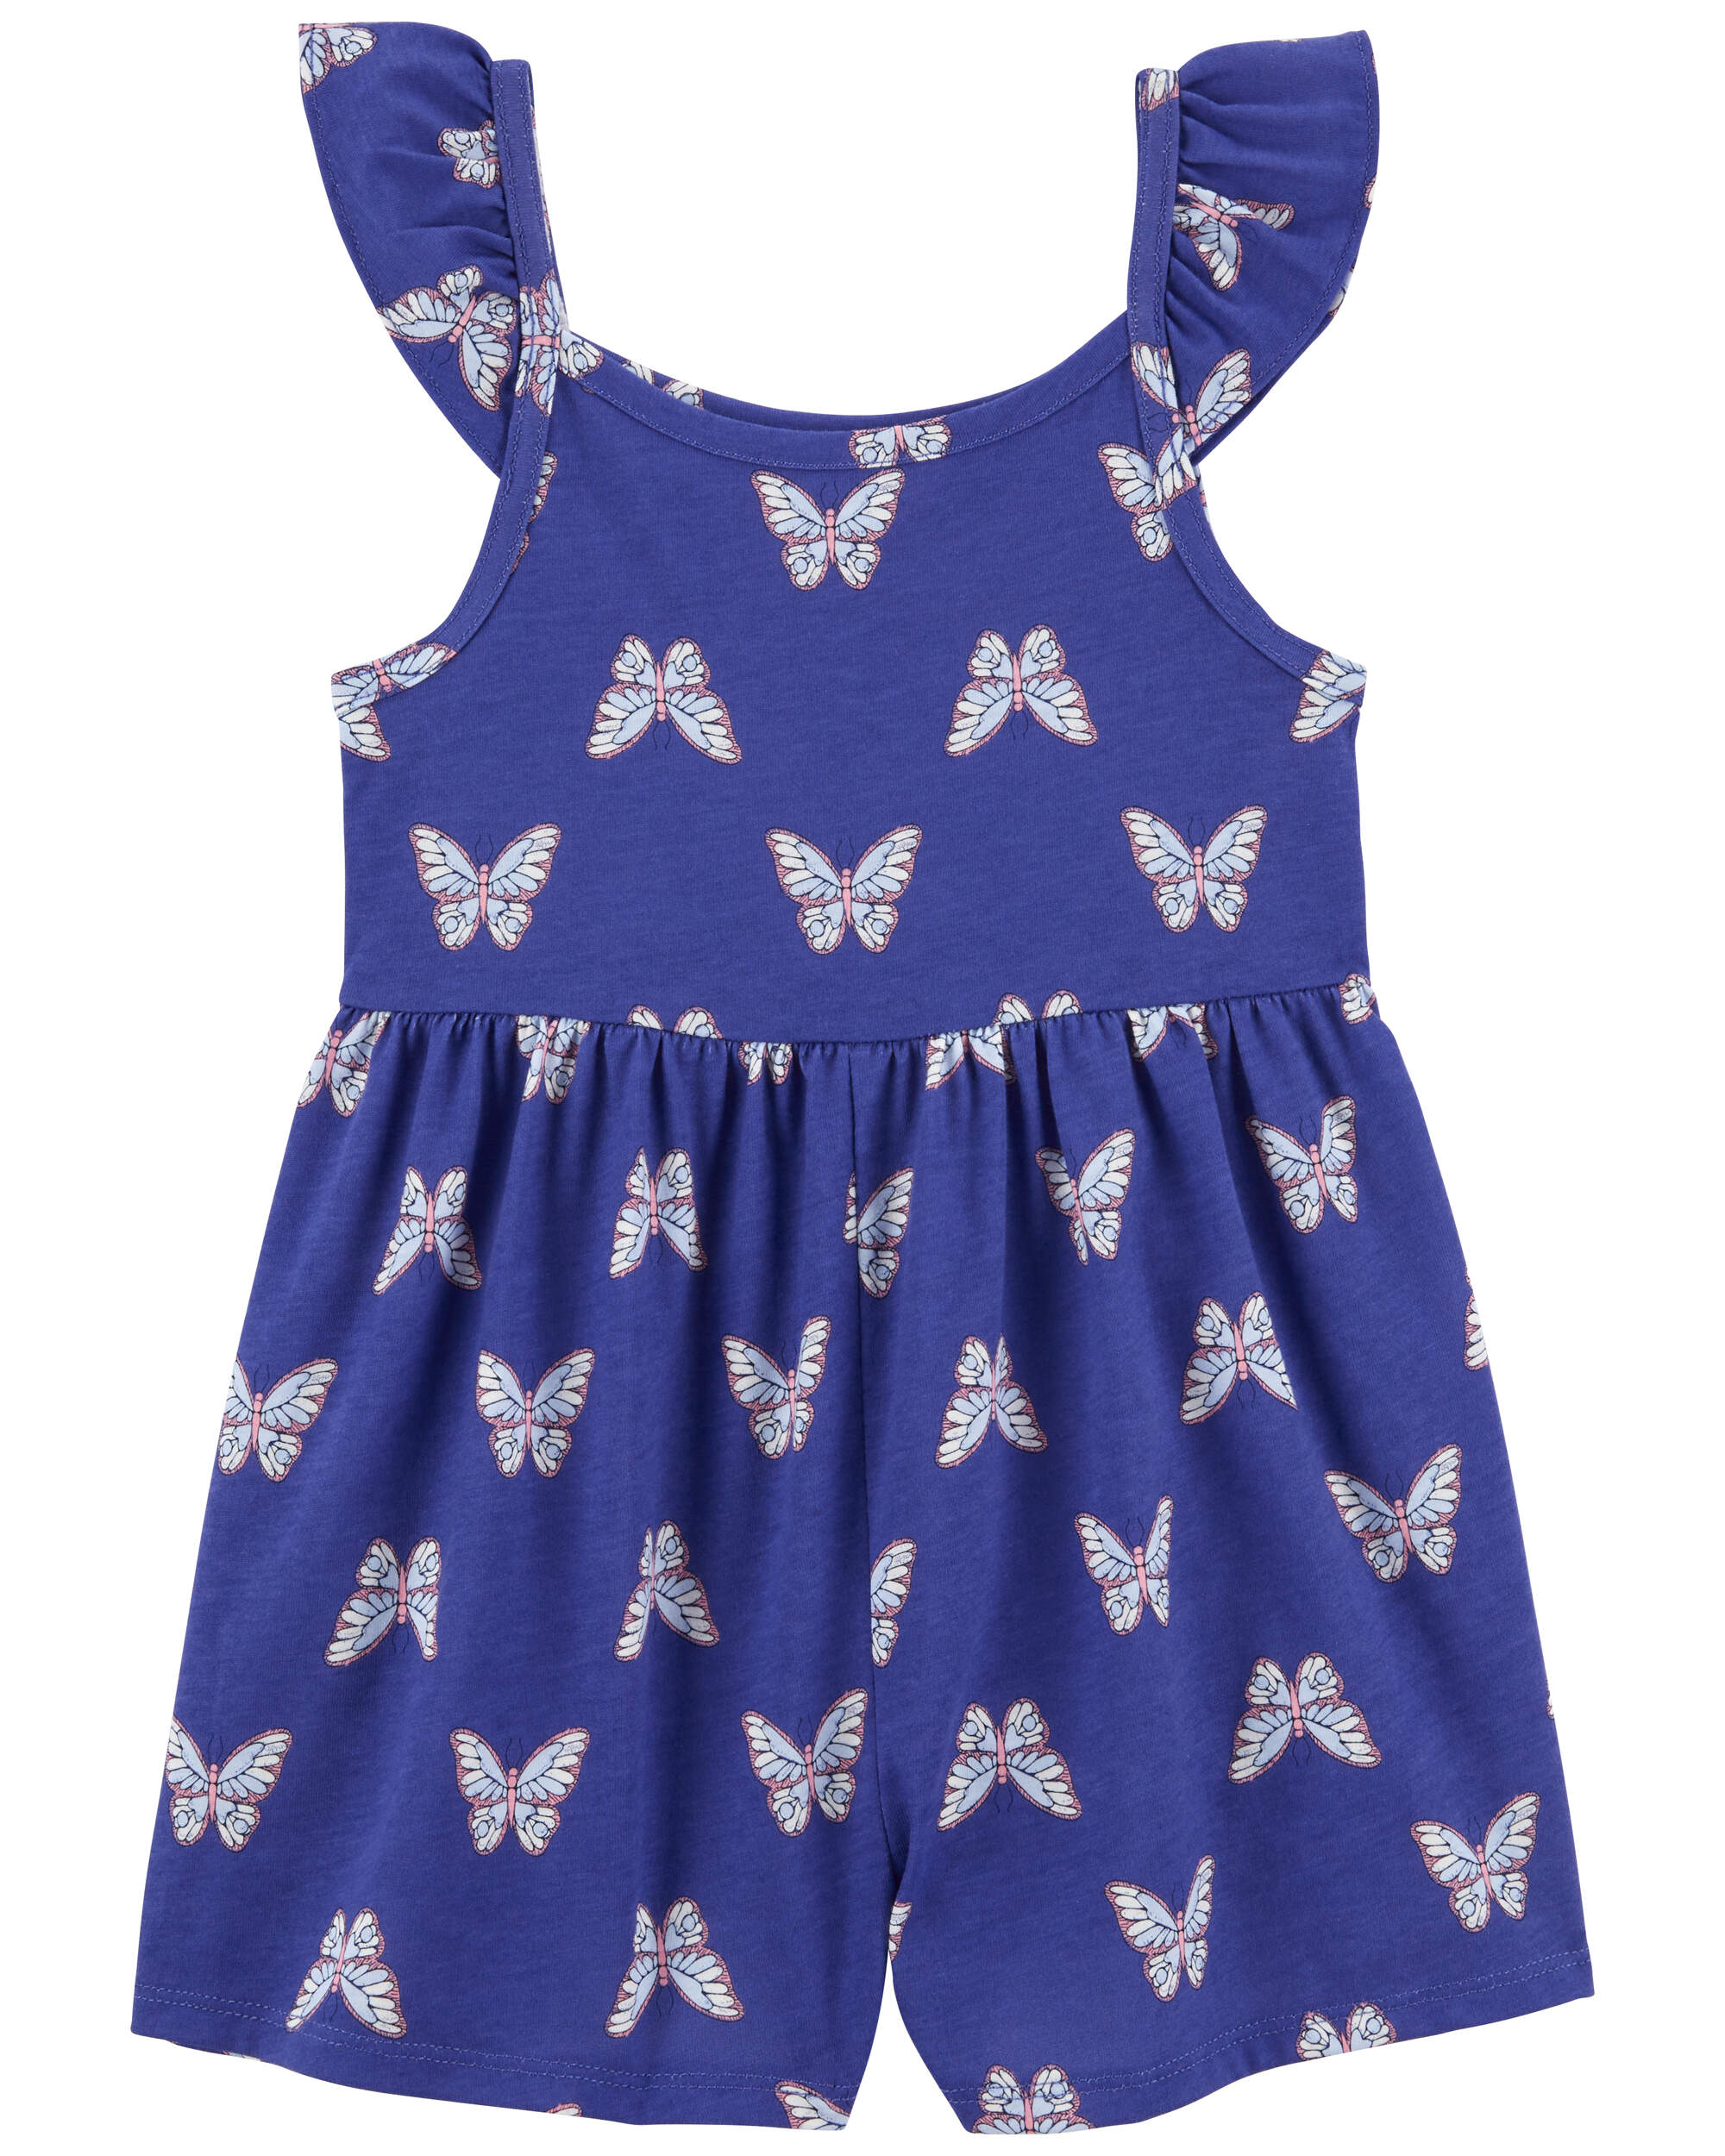 Toddler Butterfly Cotton Romper